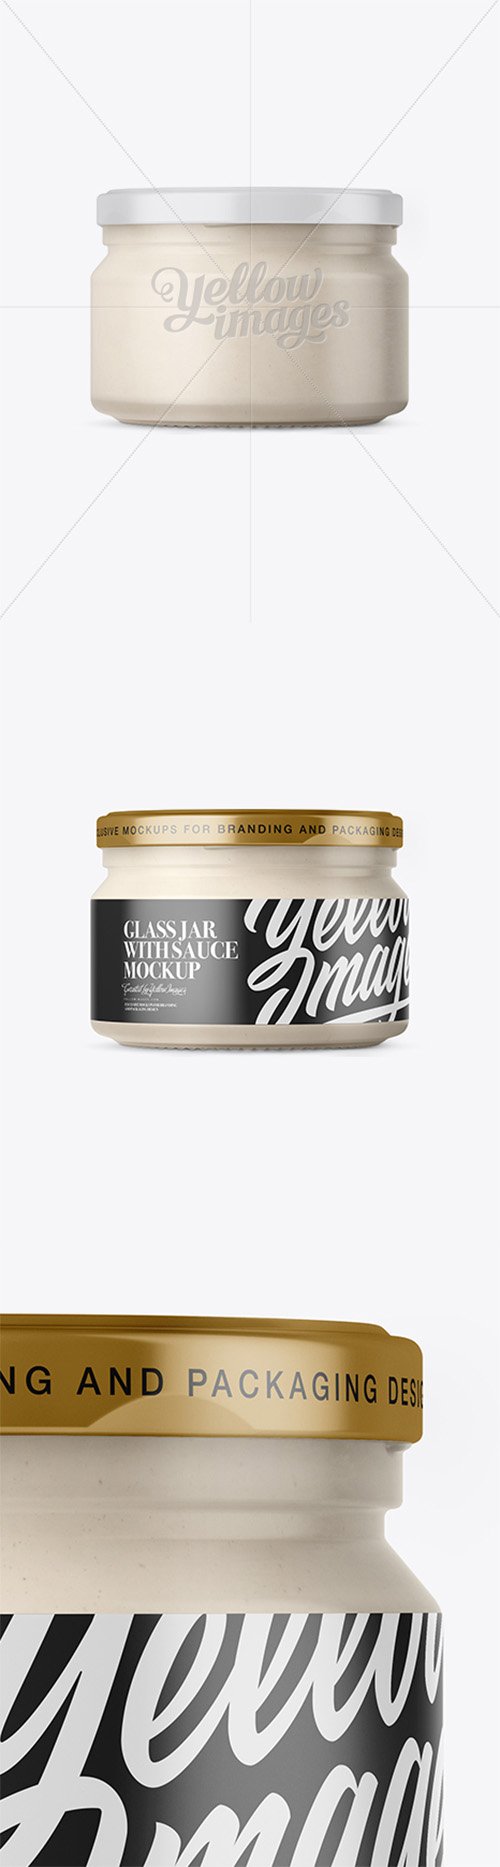 250ml Clear Glass Jar With Garlic Sauce Mockup - Front View 19457 TIF